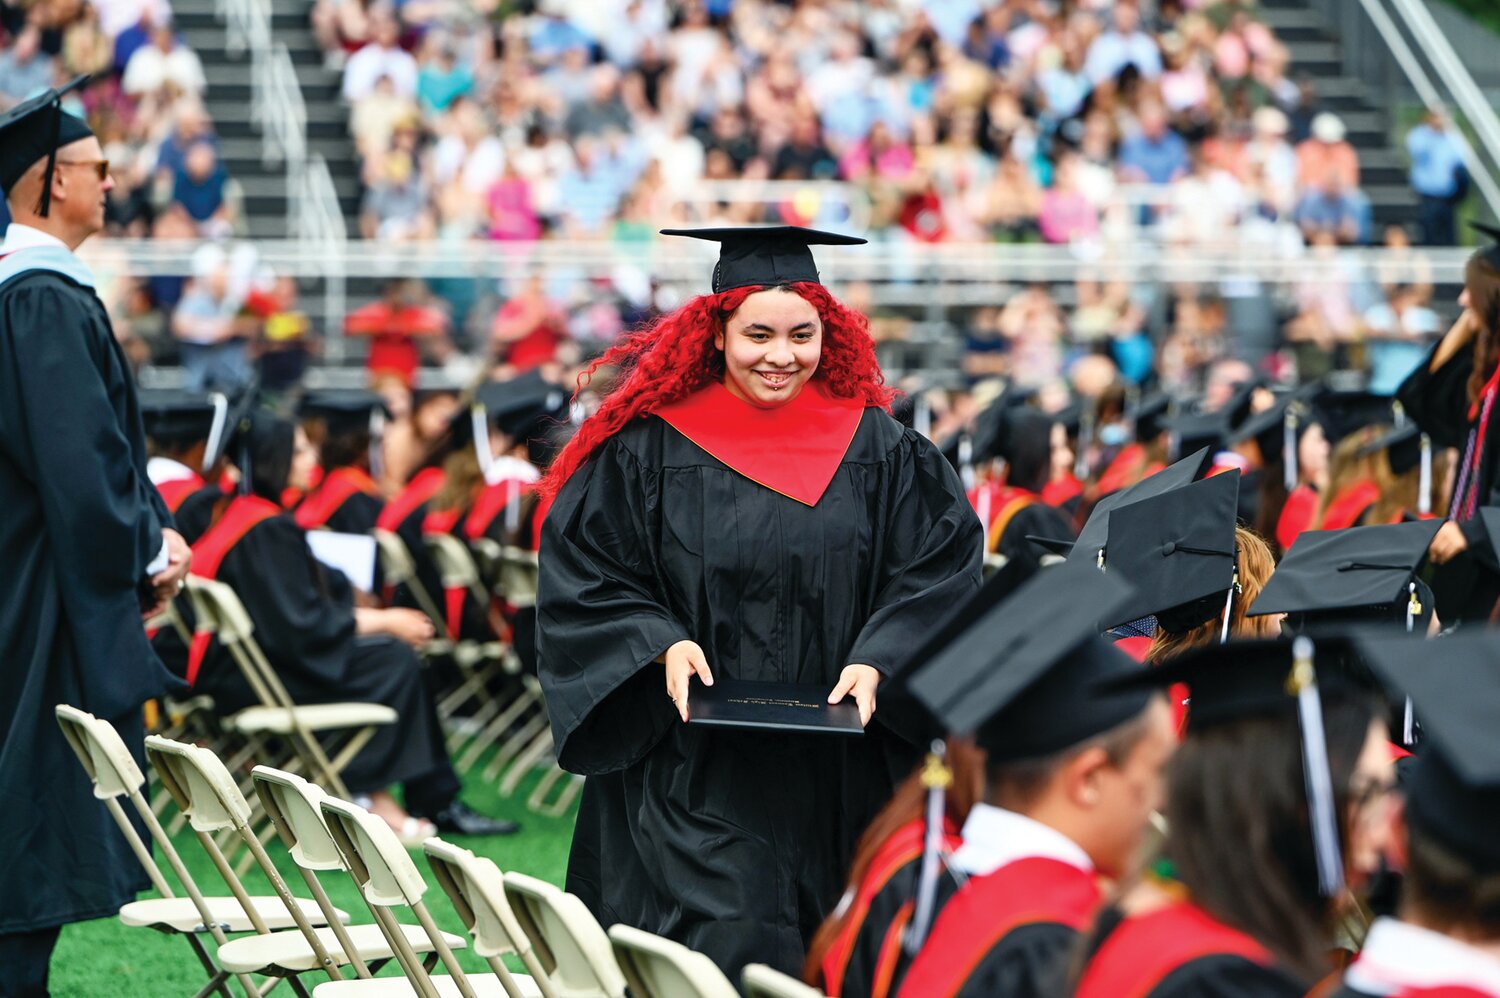 A William Tennent senior returns to her seat with her diploma in hand.